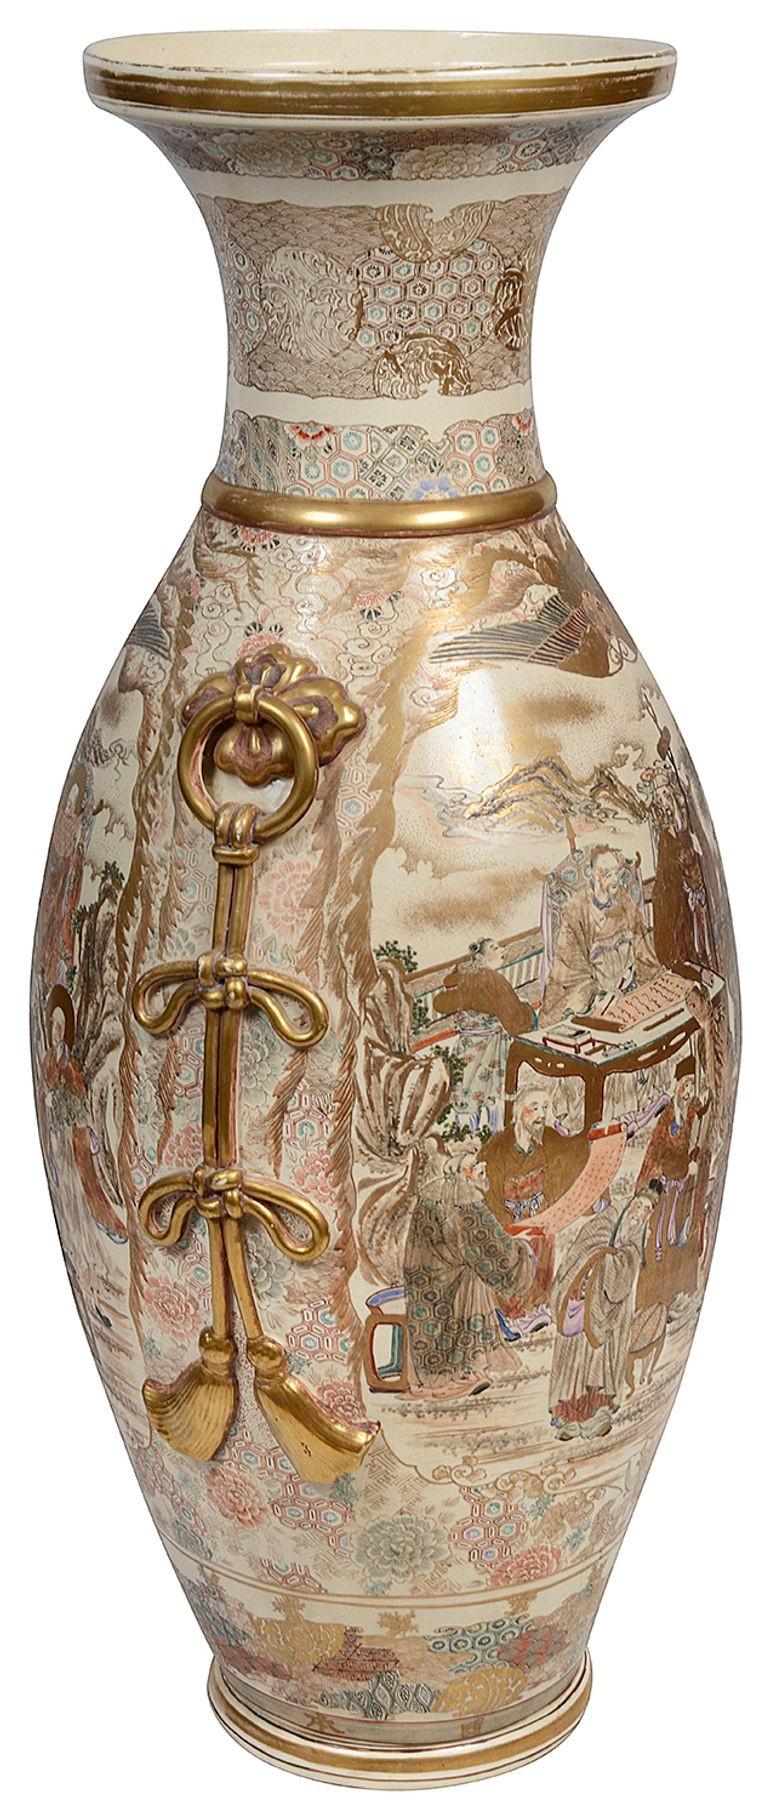 A fine quality late 19th Century Meiji period (1868-1912) Japanese Satsuma vase, with wonderful gilded decoration, depicting various scholars, tradesman and courtiers. Ring-drop handles to either side with rope tied bows.

Batch 75 61799. ANKZ
